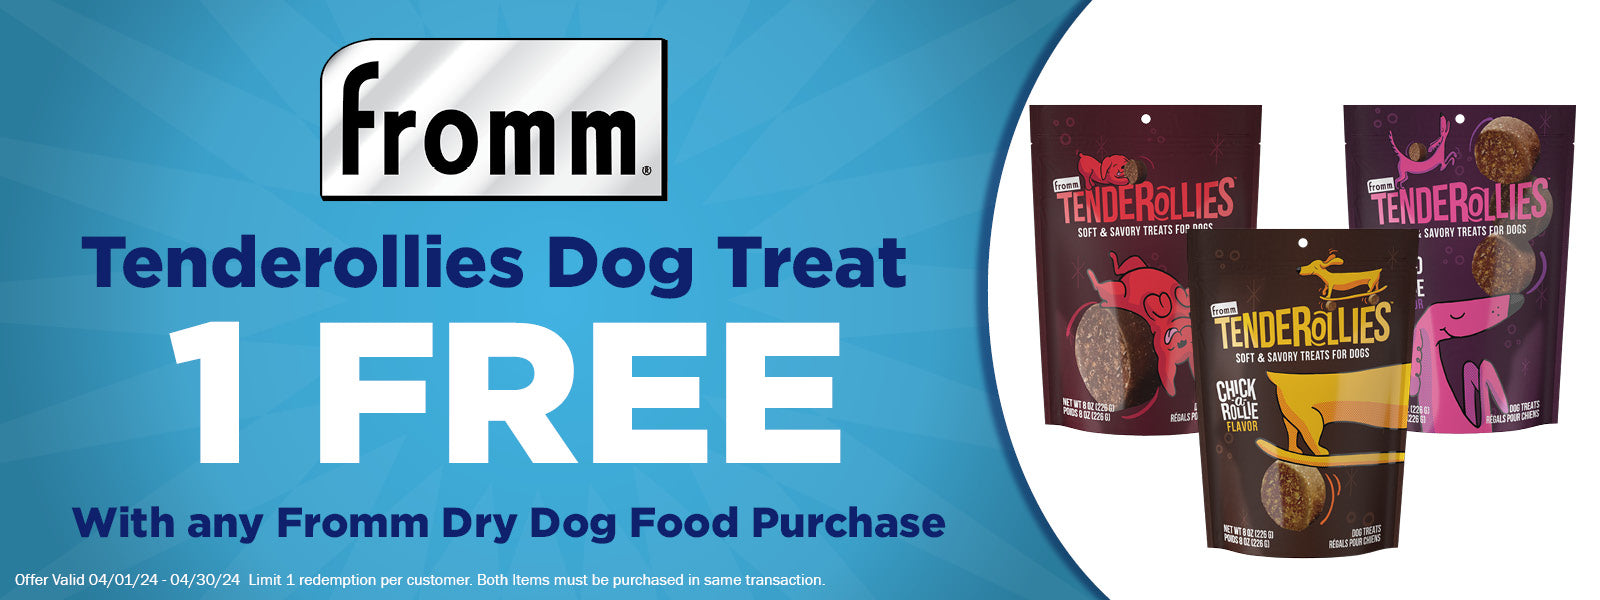 Fromm Tenderolies DOg Treat Free with any Fromm Dry  Dog Food Purchase. Limit 1 Per Customer